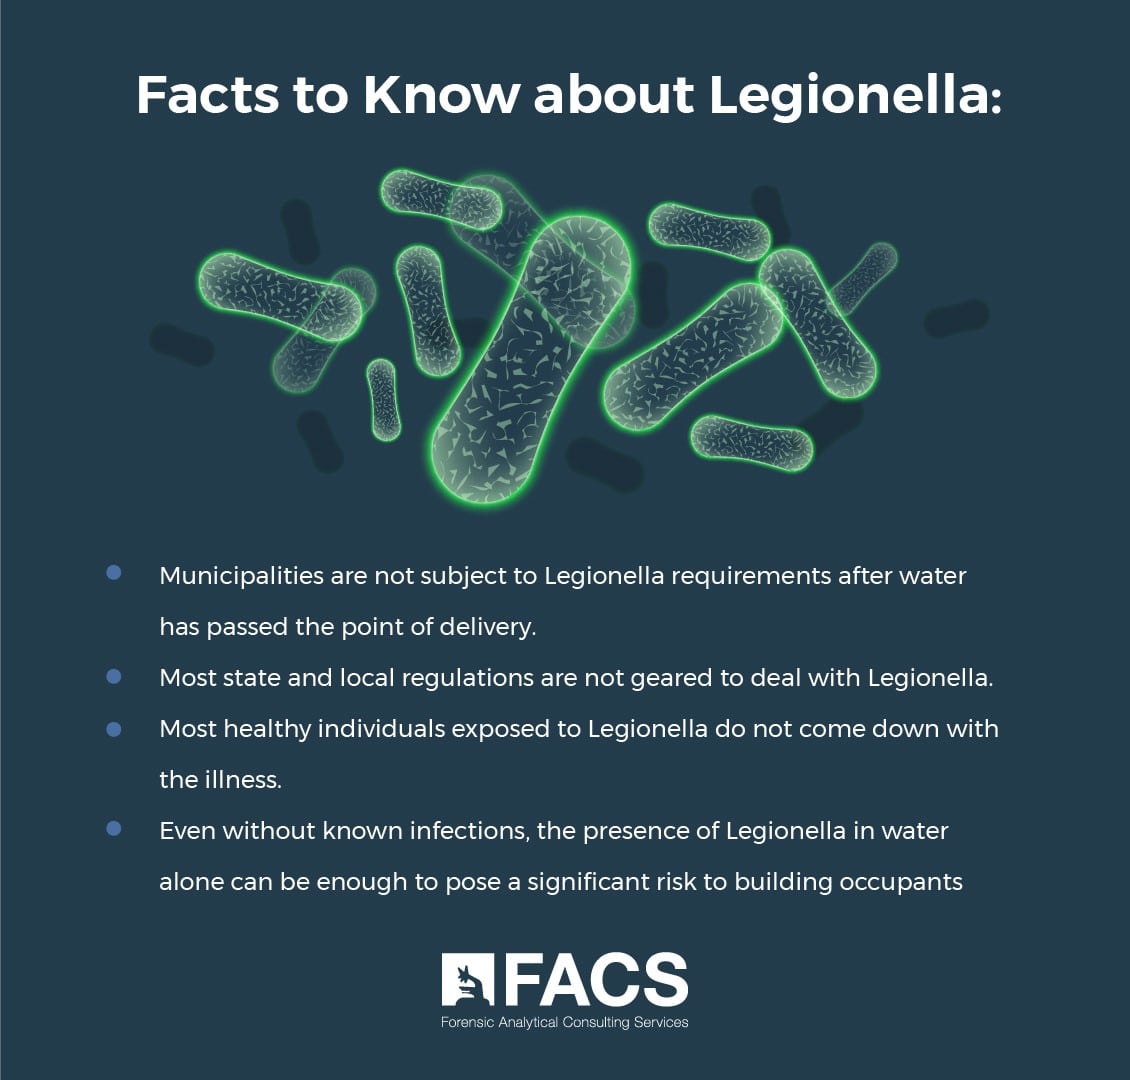 4 Facts to know about Legionella - What You Should Understand about Legionella & Legionnaires disease in water systems. 